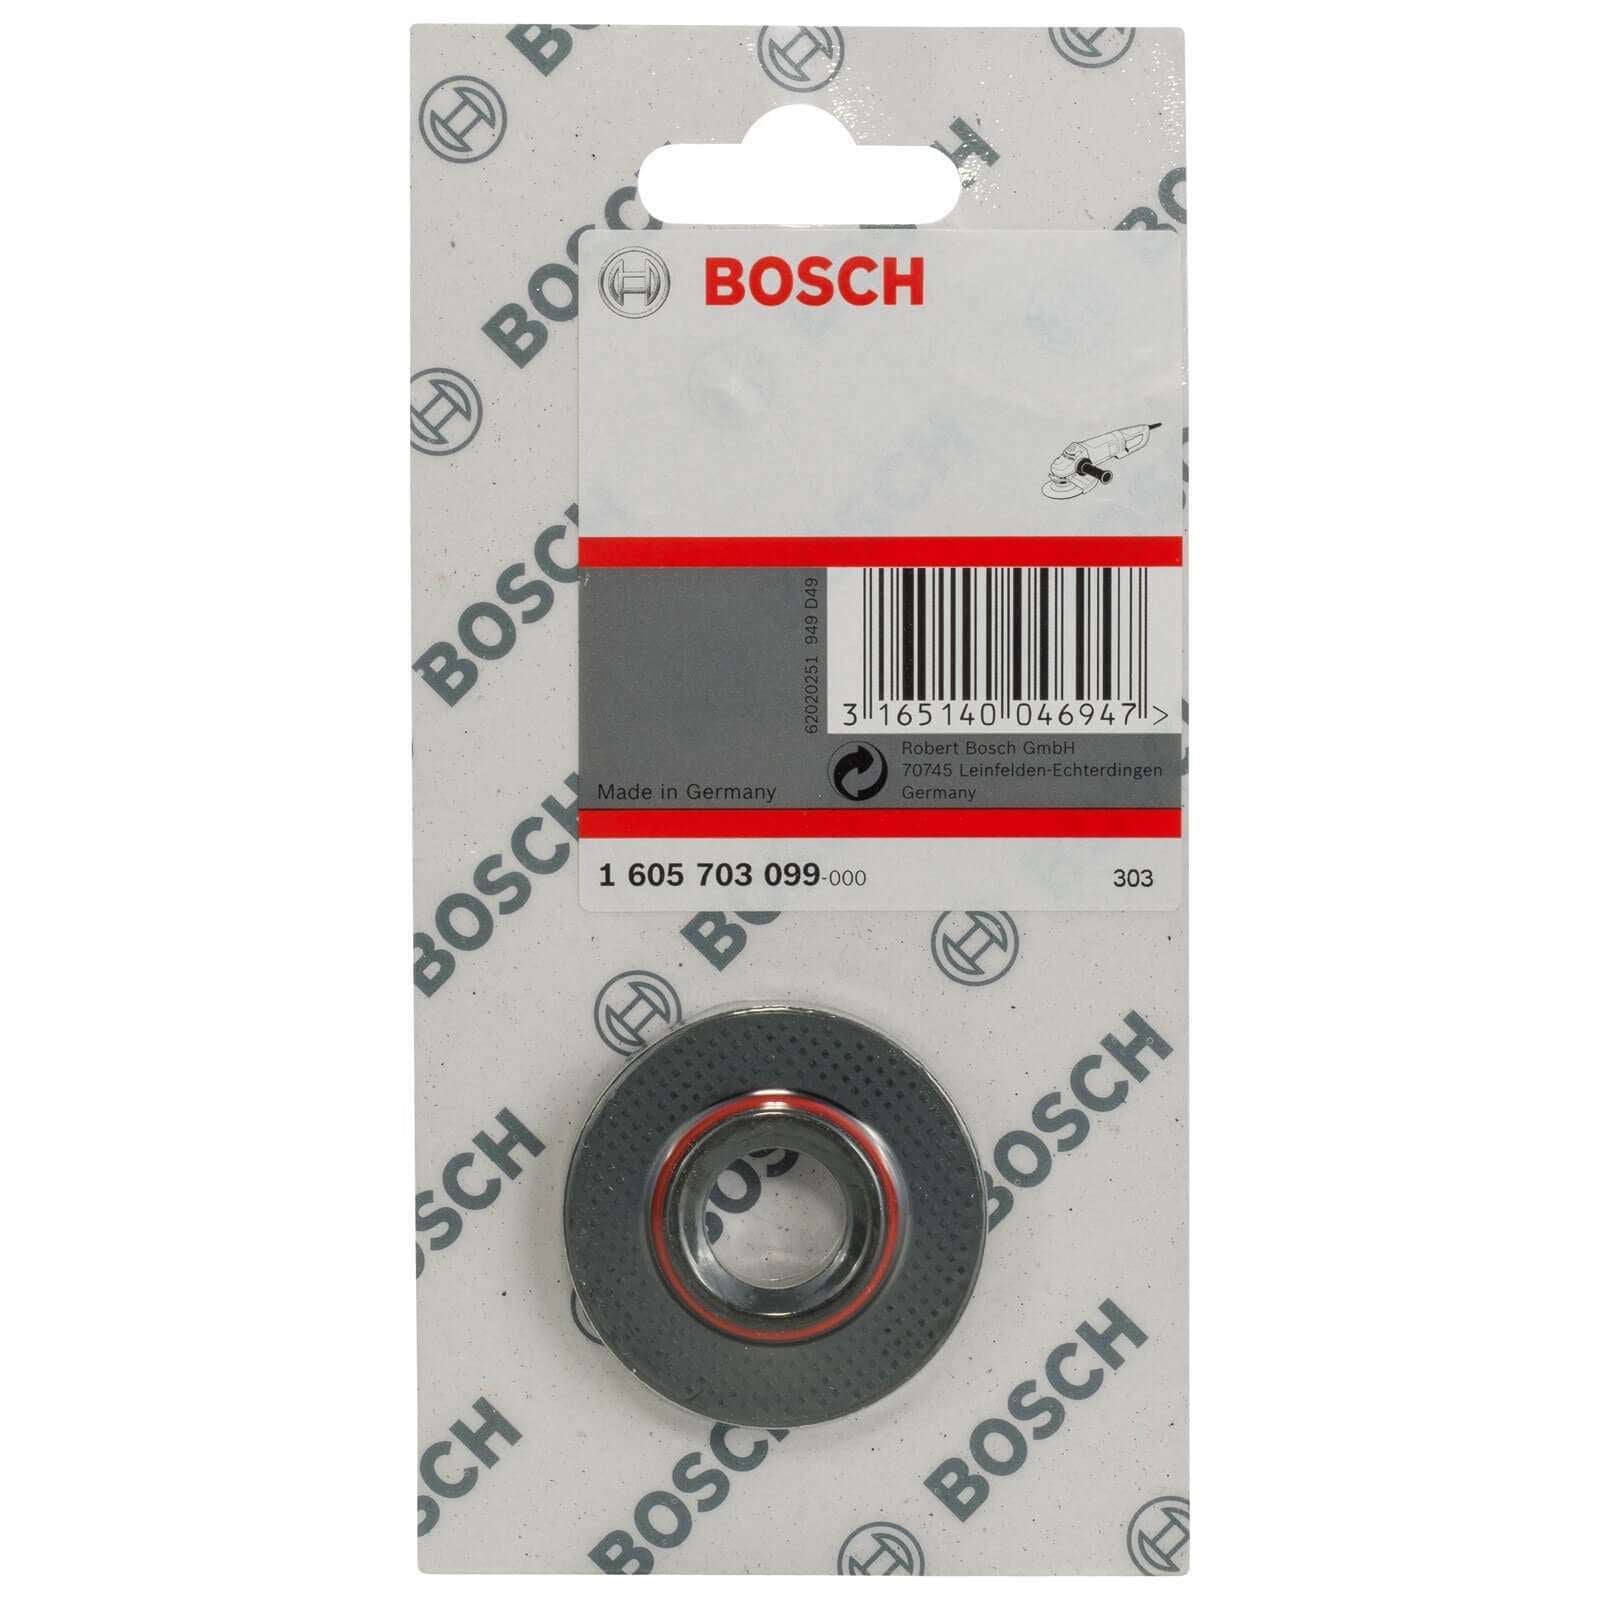 Bosch Backing flange for angle grinder, M14, 115-150 disc diameter 1605703099 Power Tool Services